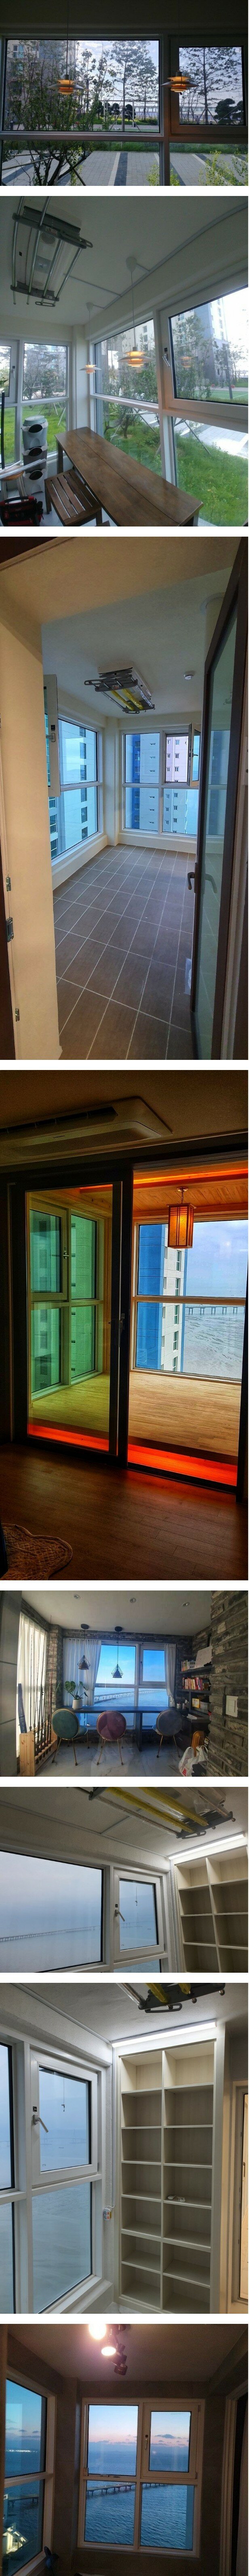 A view of the Incheon apartment with a view of the west sea.